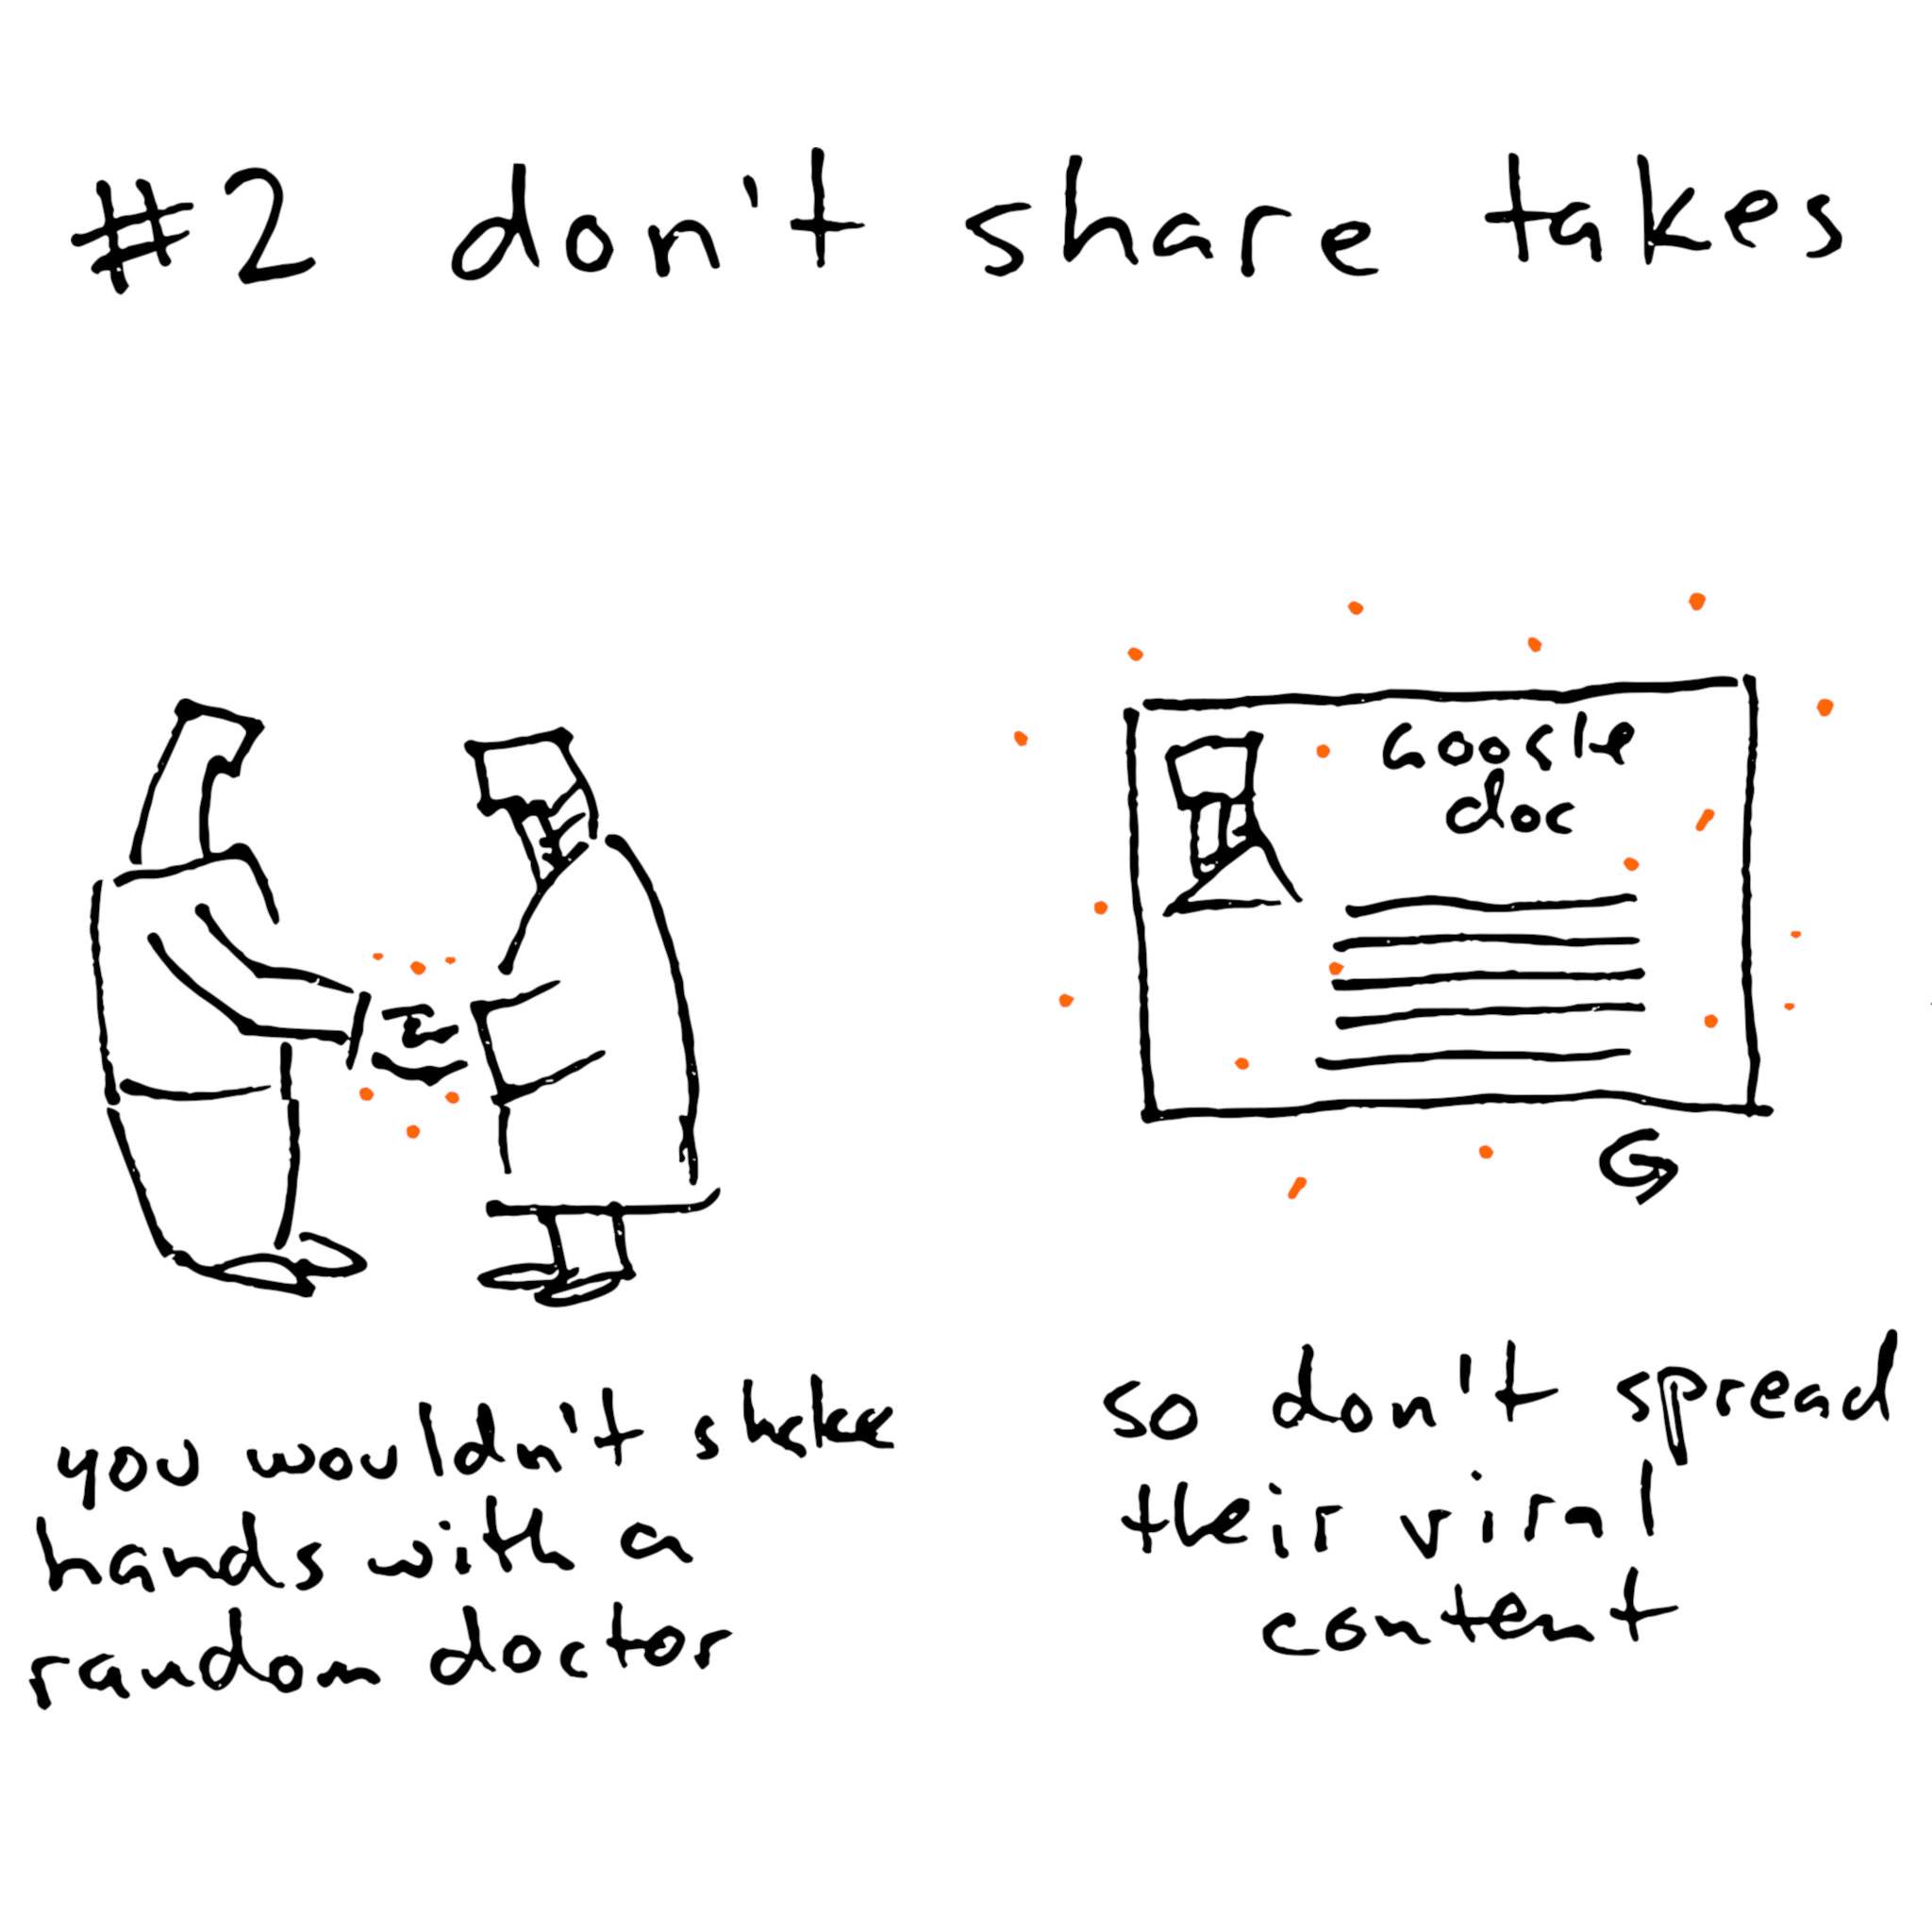 #2 don't share takes - you wouldn't shake hands with a random doctor so don't spread their viral content. A person shaking hands with a doctor, and a Google Doc with that doctor's face on it.